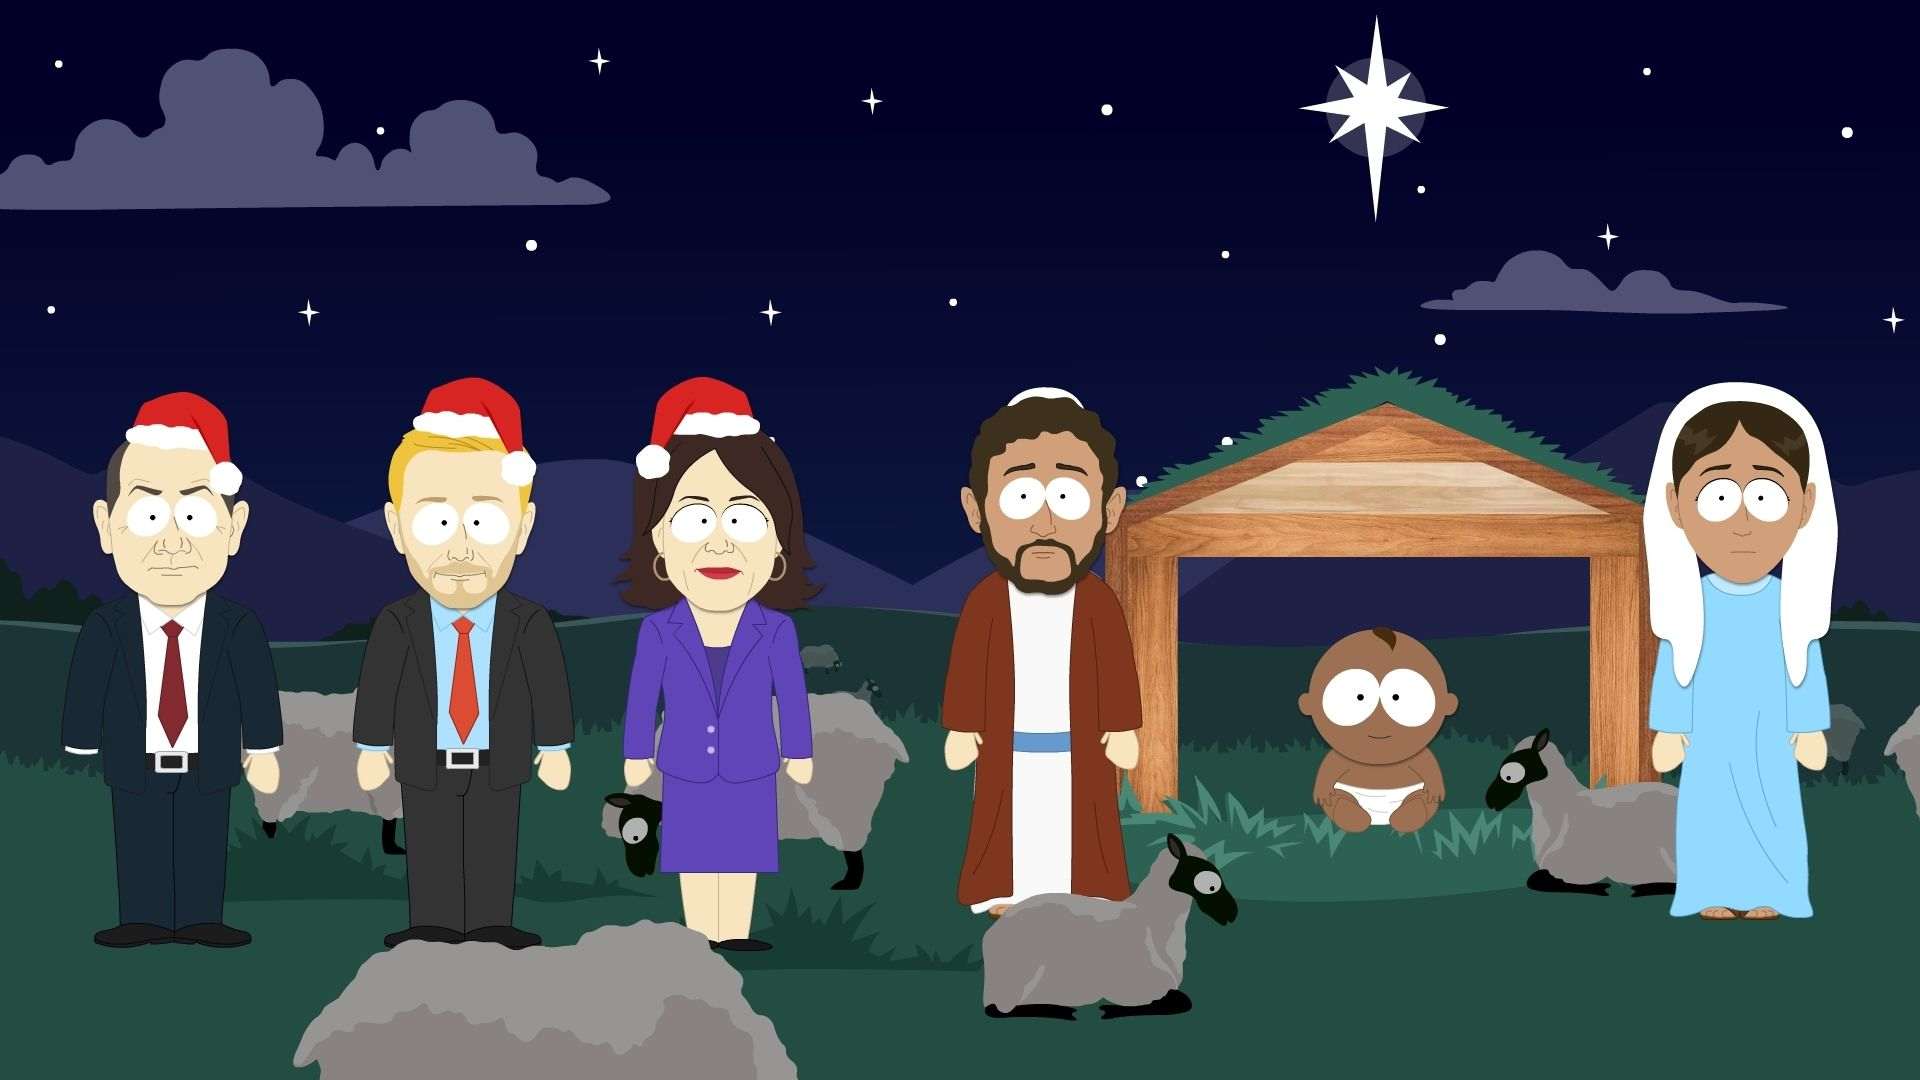 South-Park-Style-Christmas-Story